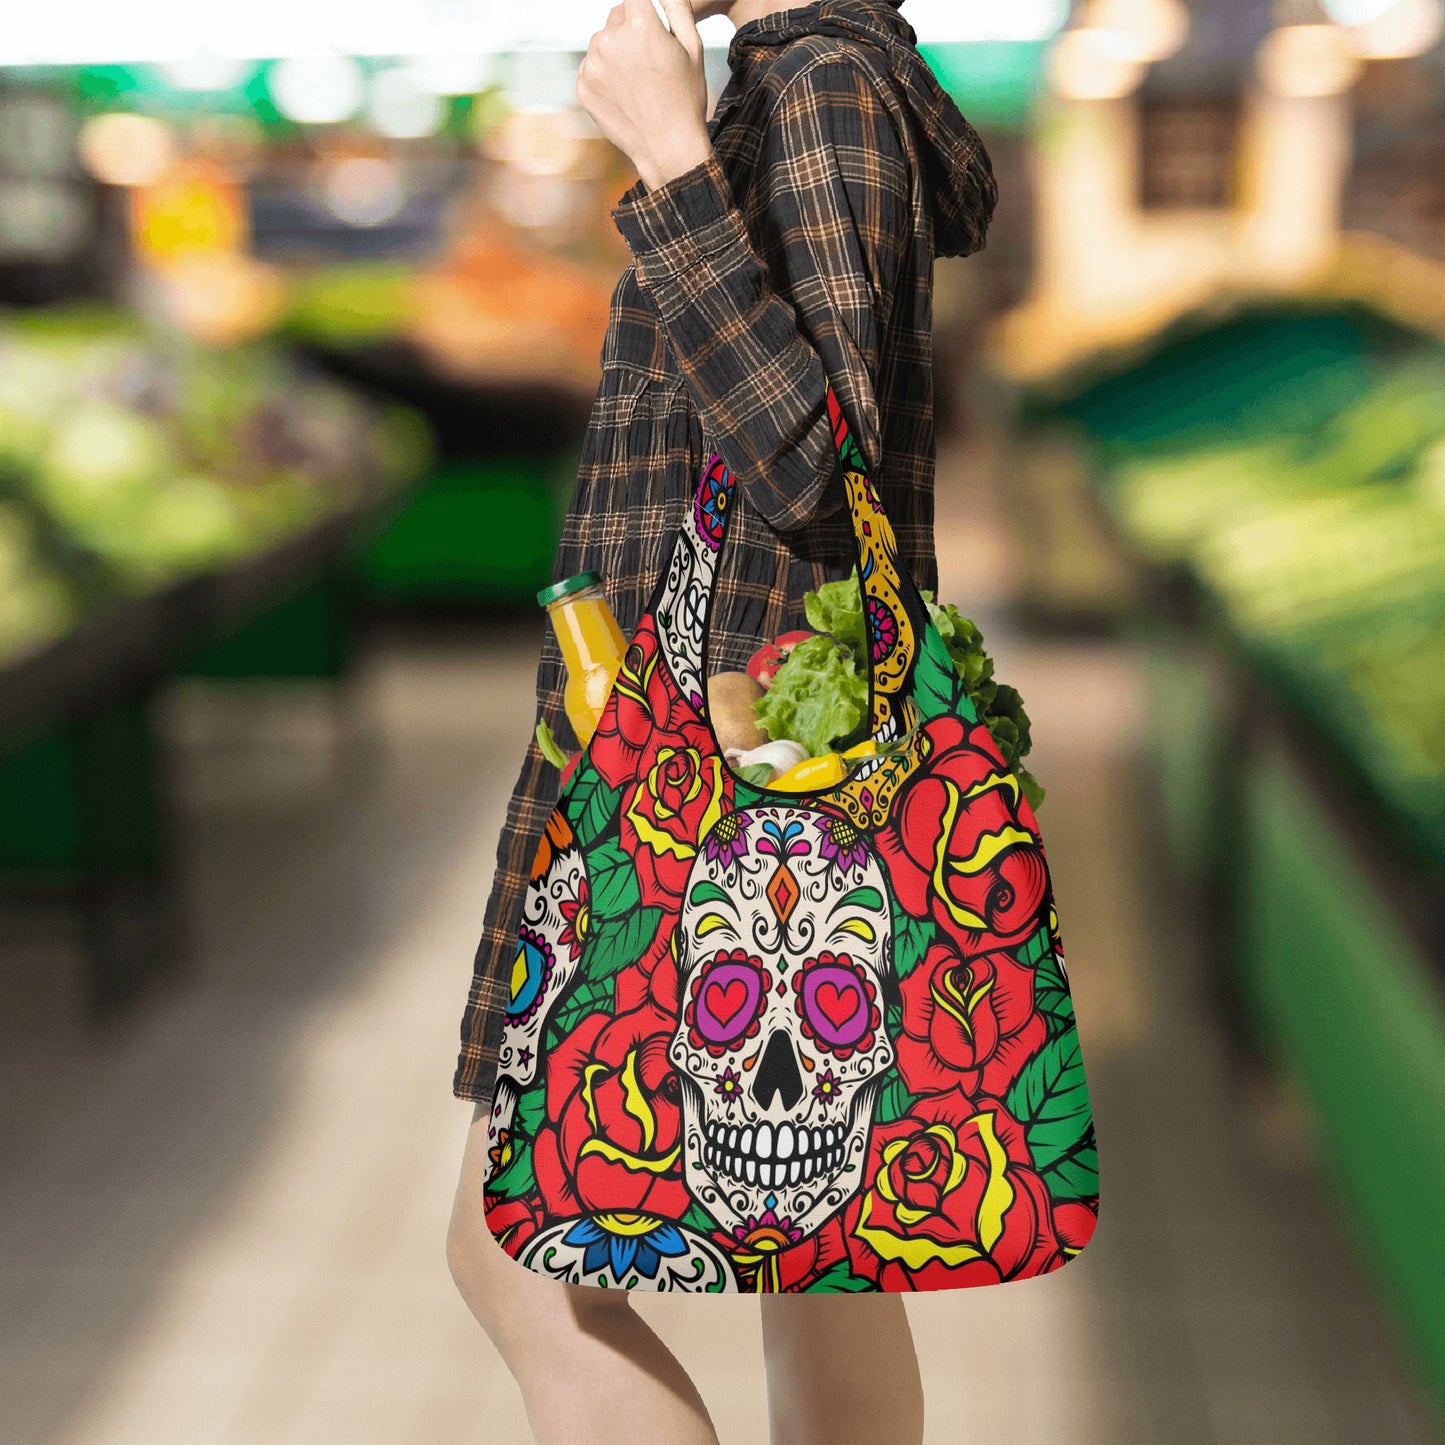 Day of the dead 3 Pack of Grocery Bags